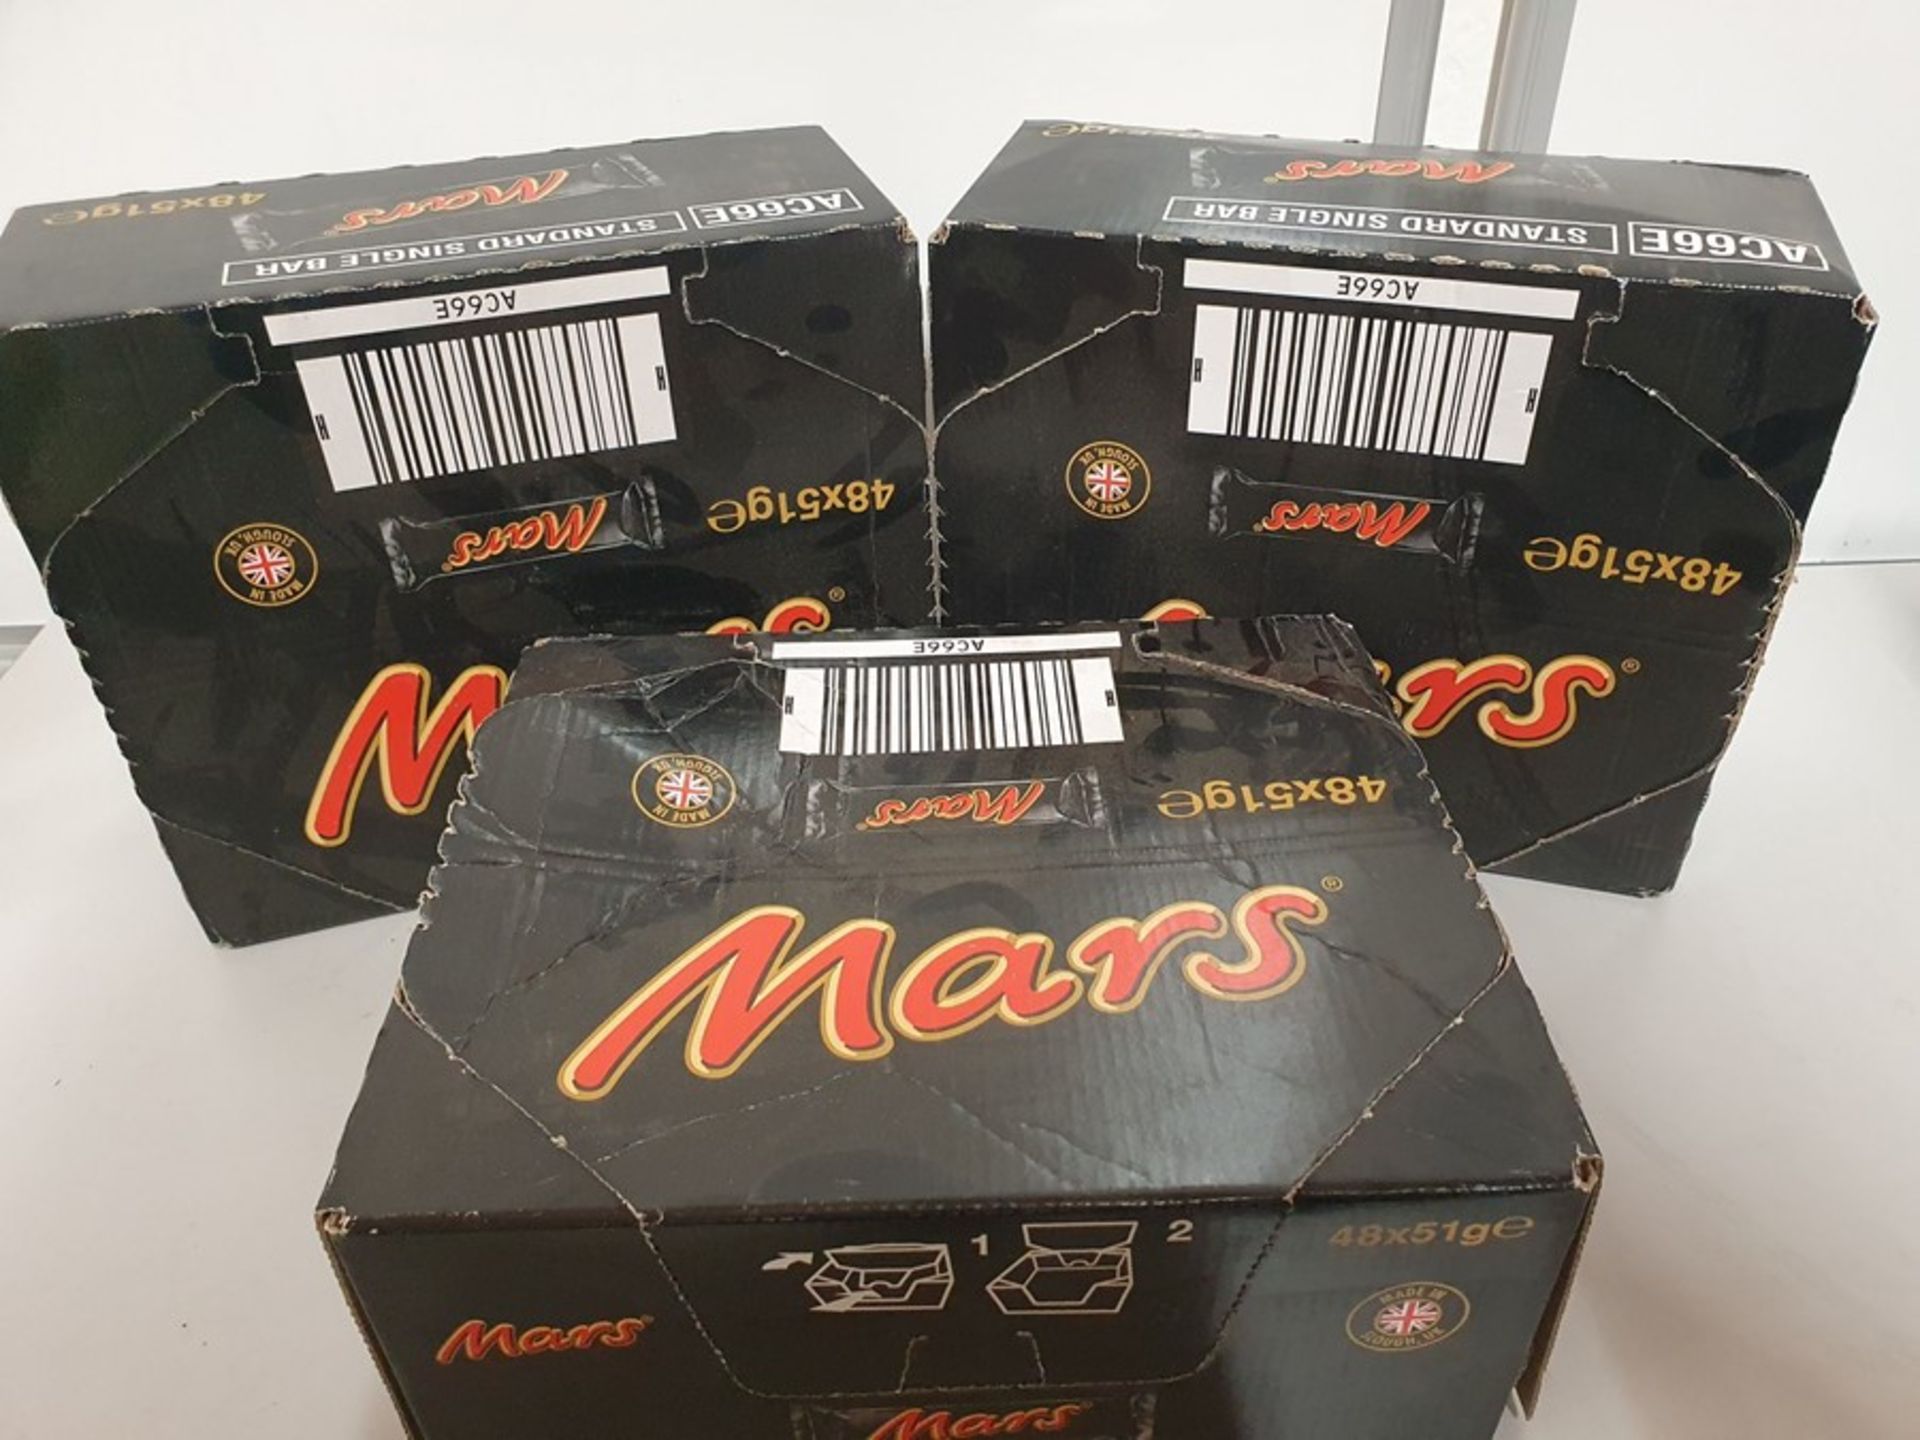 ONE LOT TO CONTAIN THREE UNOPENED BOXES OF MARS BARS. EACH BOX CONTAINS 48 BARS, 144 BARS PER LOT.